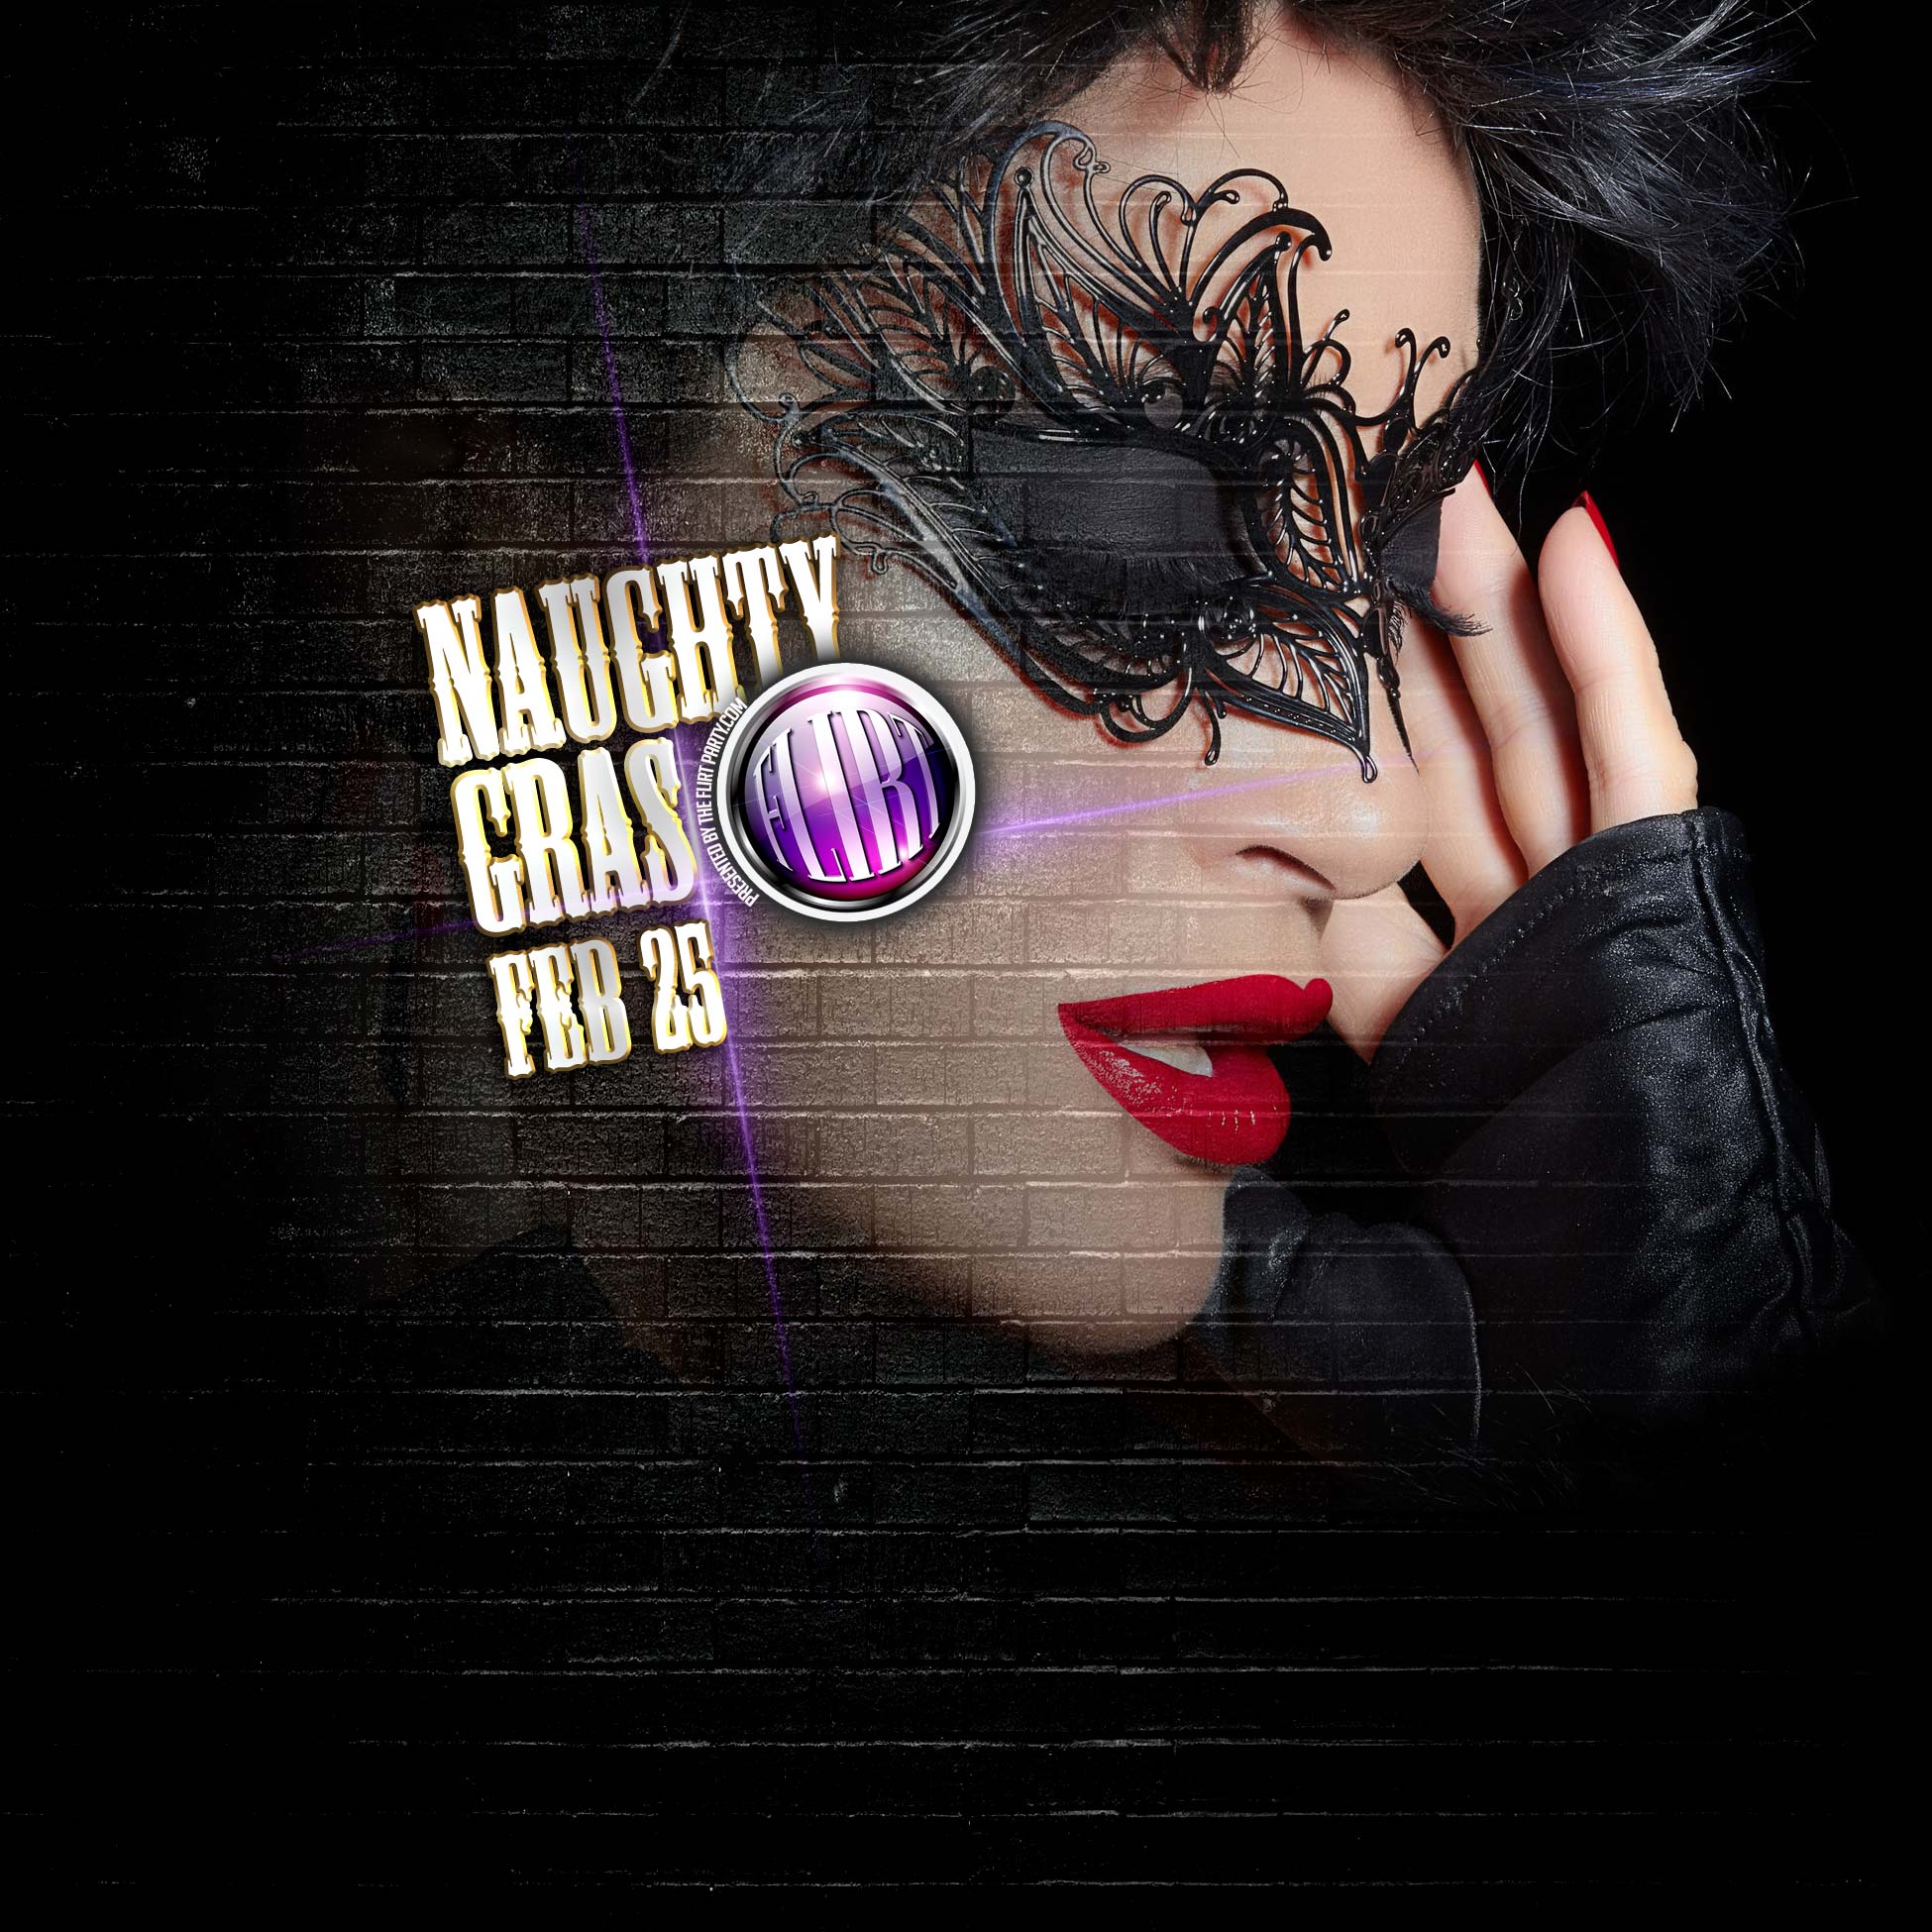 feb-25-naughty-gras-featured